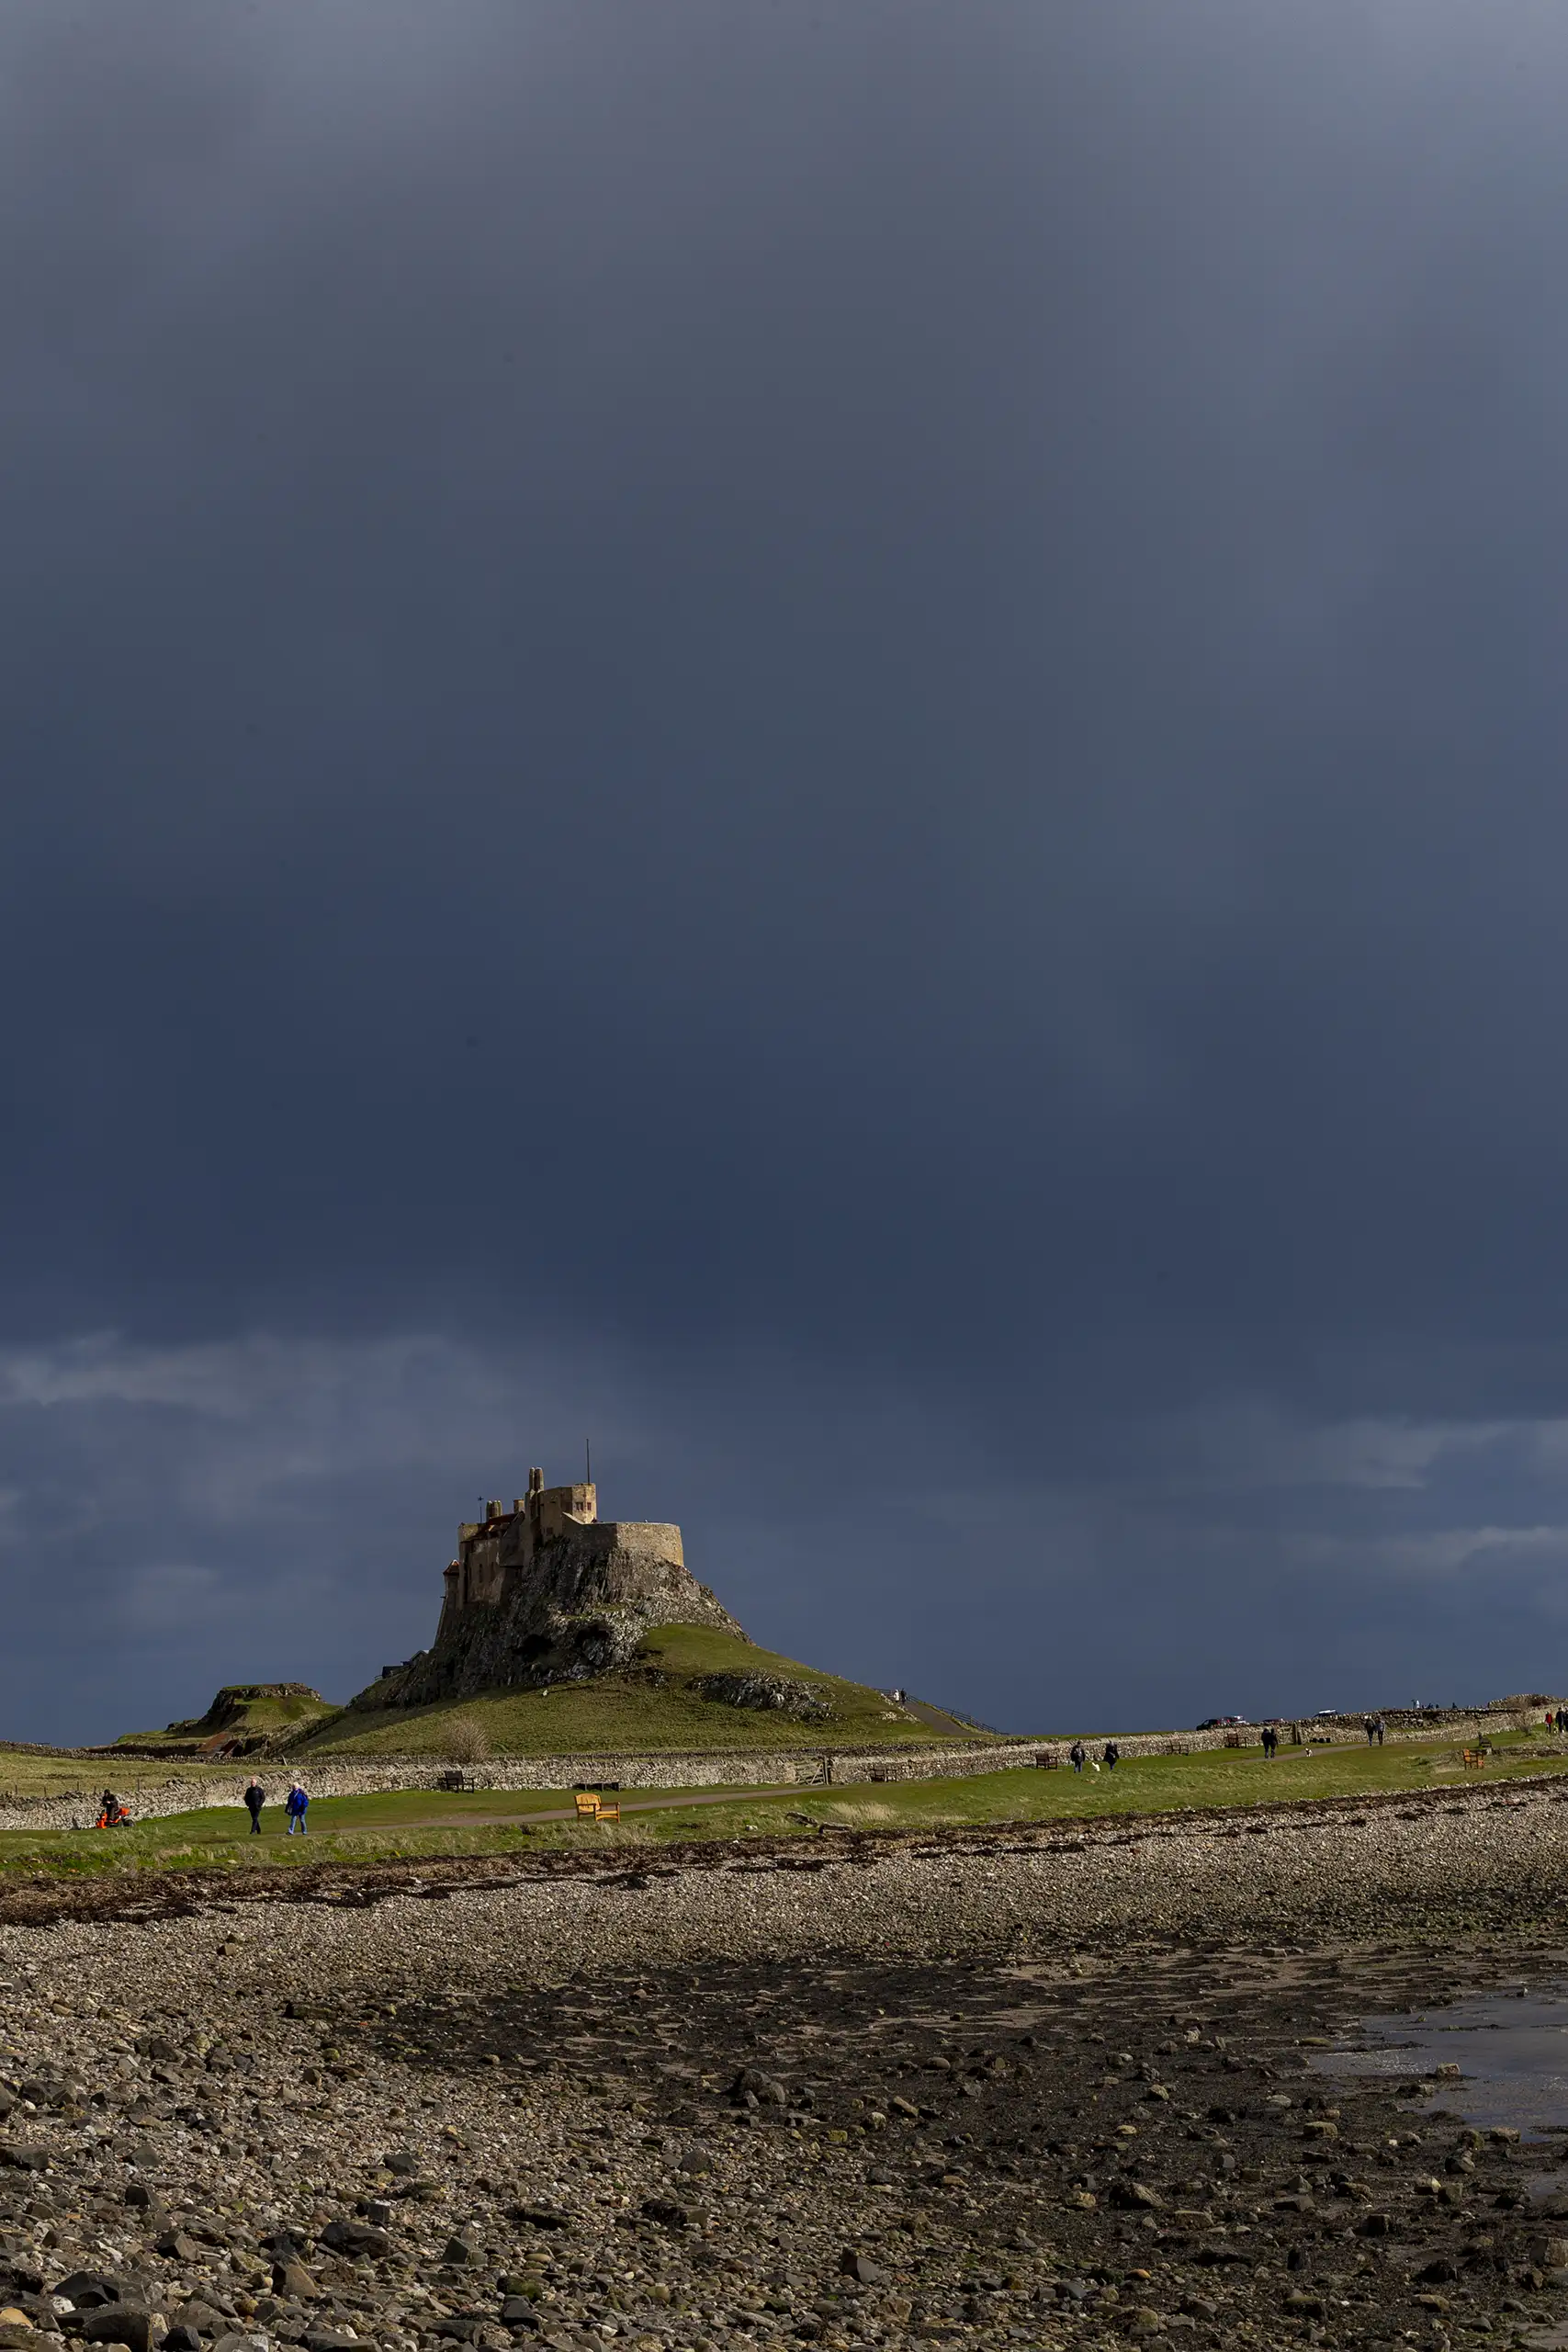 Lindisfarne Castle, a 16th-century castle located on Holy Island.